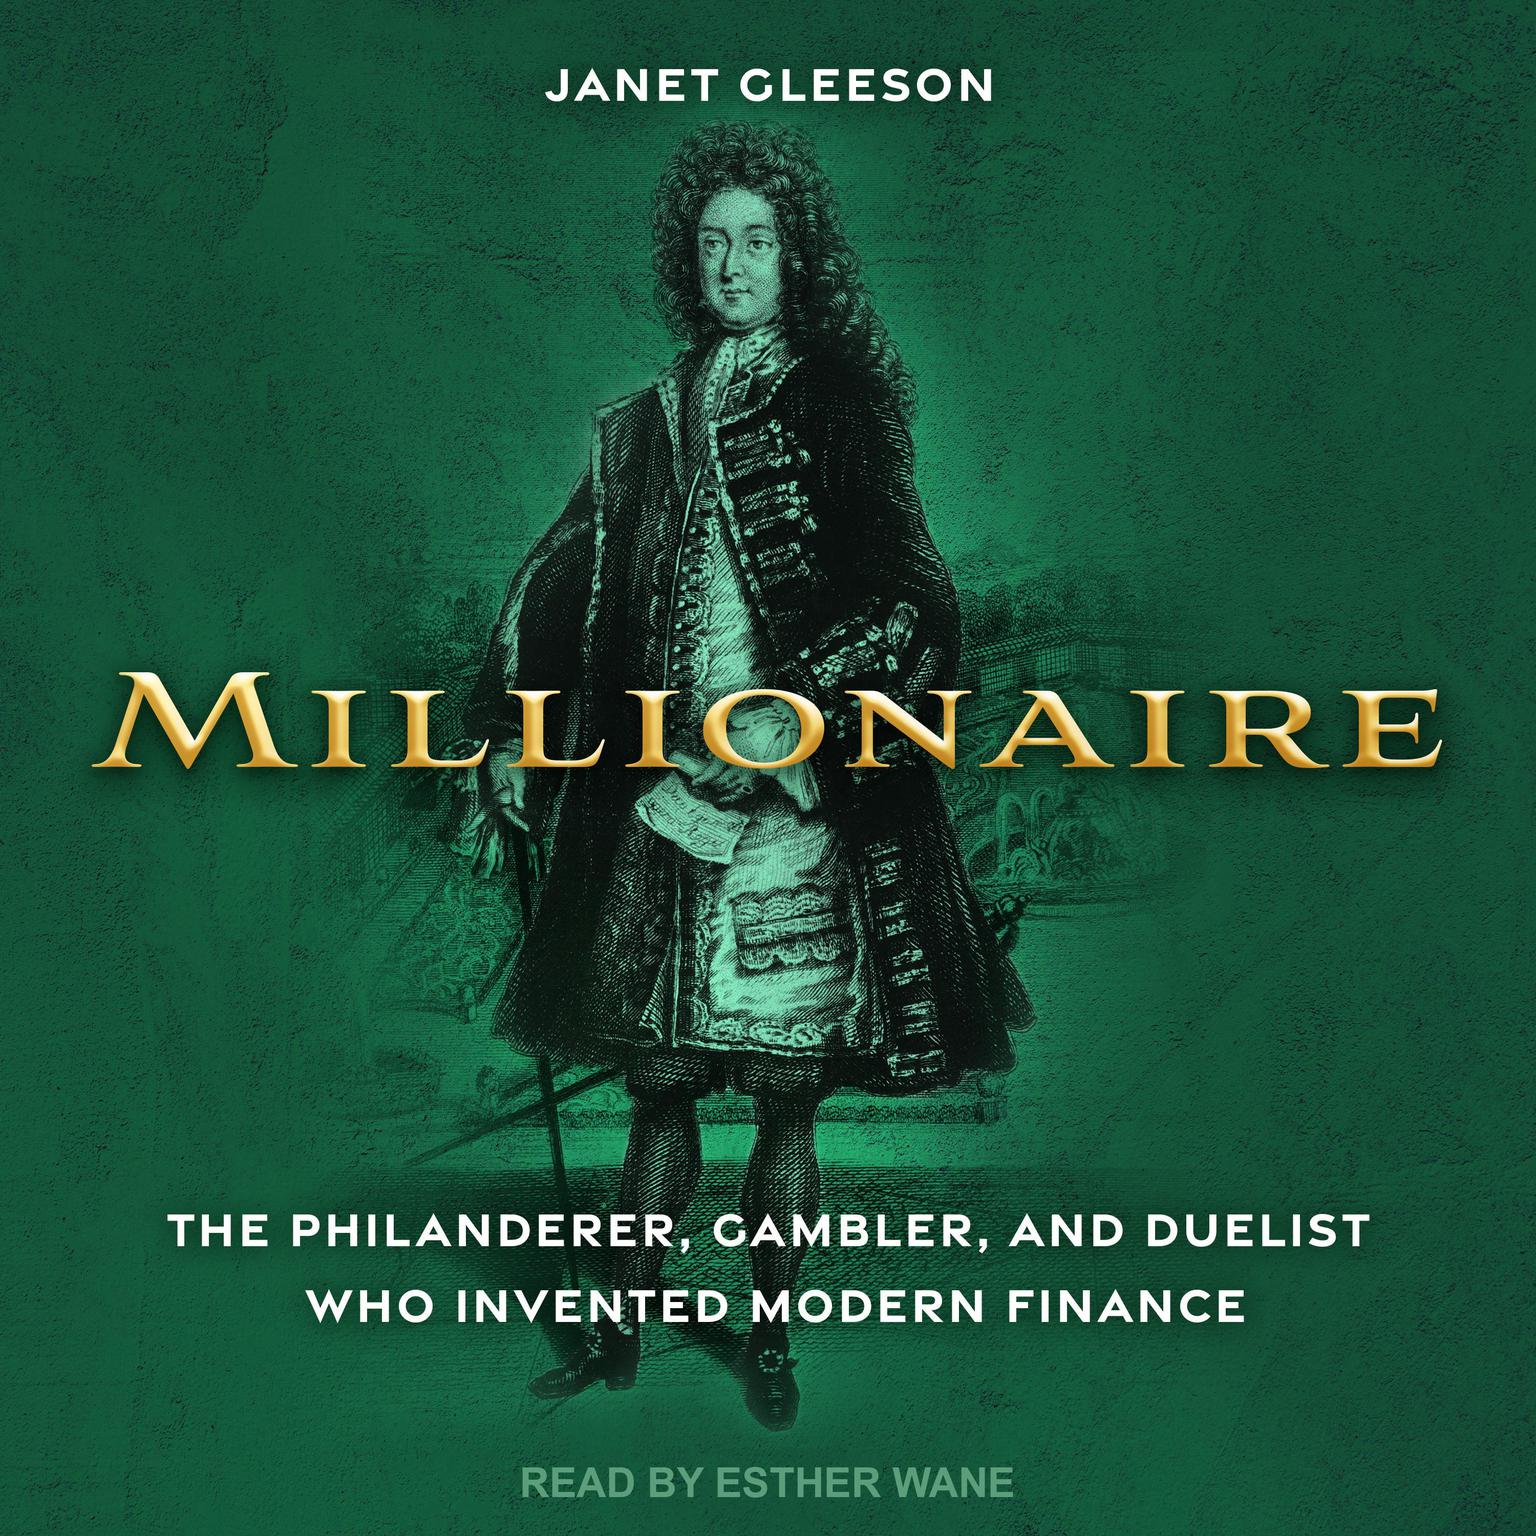 Millionaire: The Philanderer, Gambler, and Duelist Who Invented Modern Finance Audiobook, by Janet Gleeson